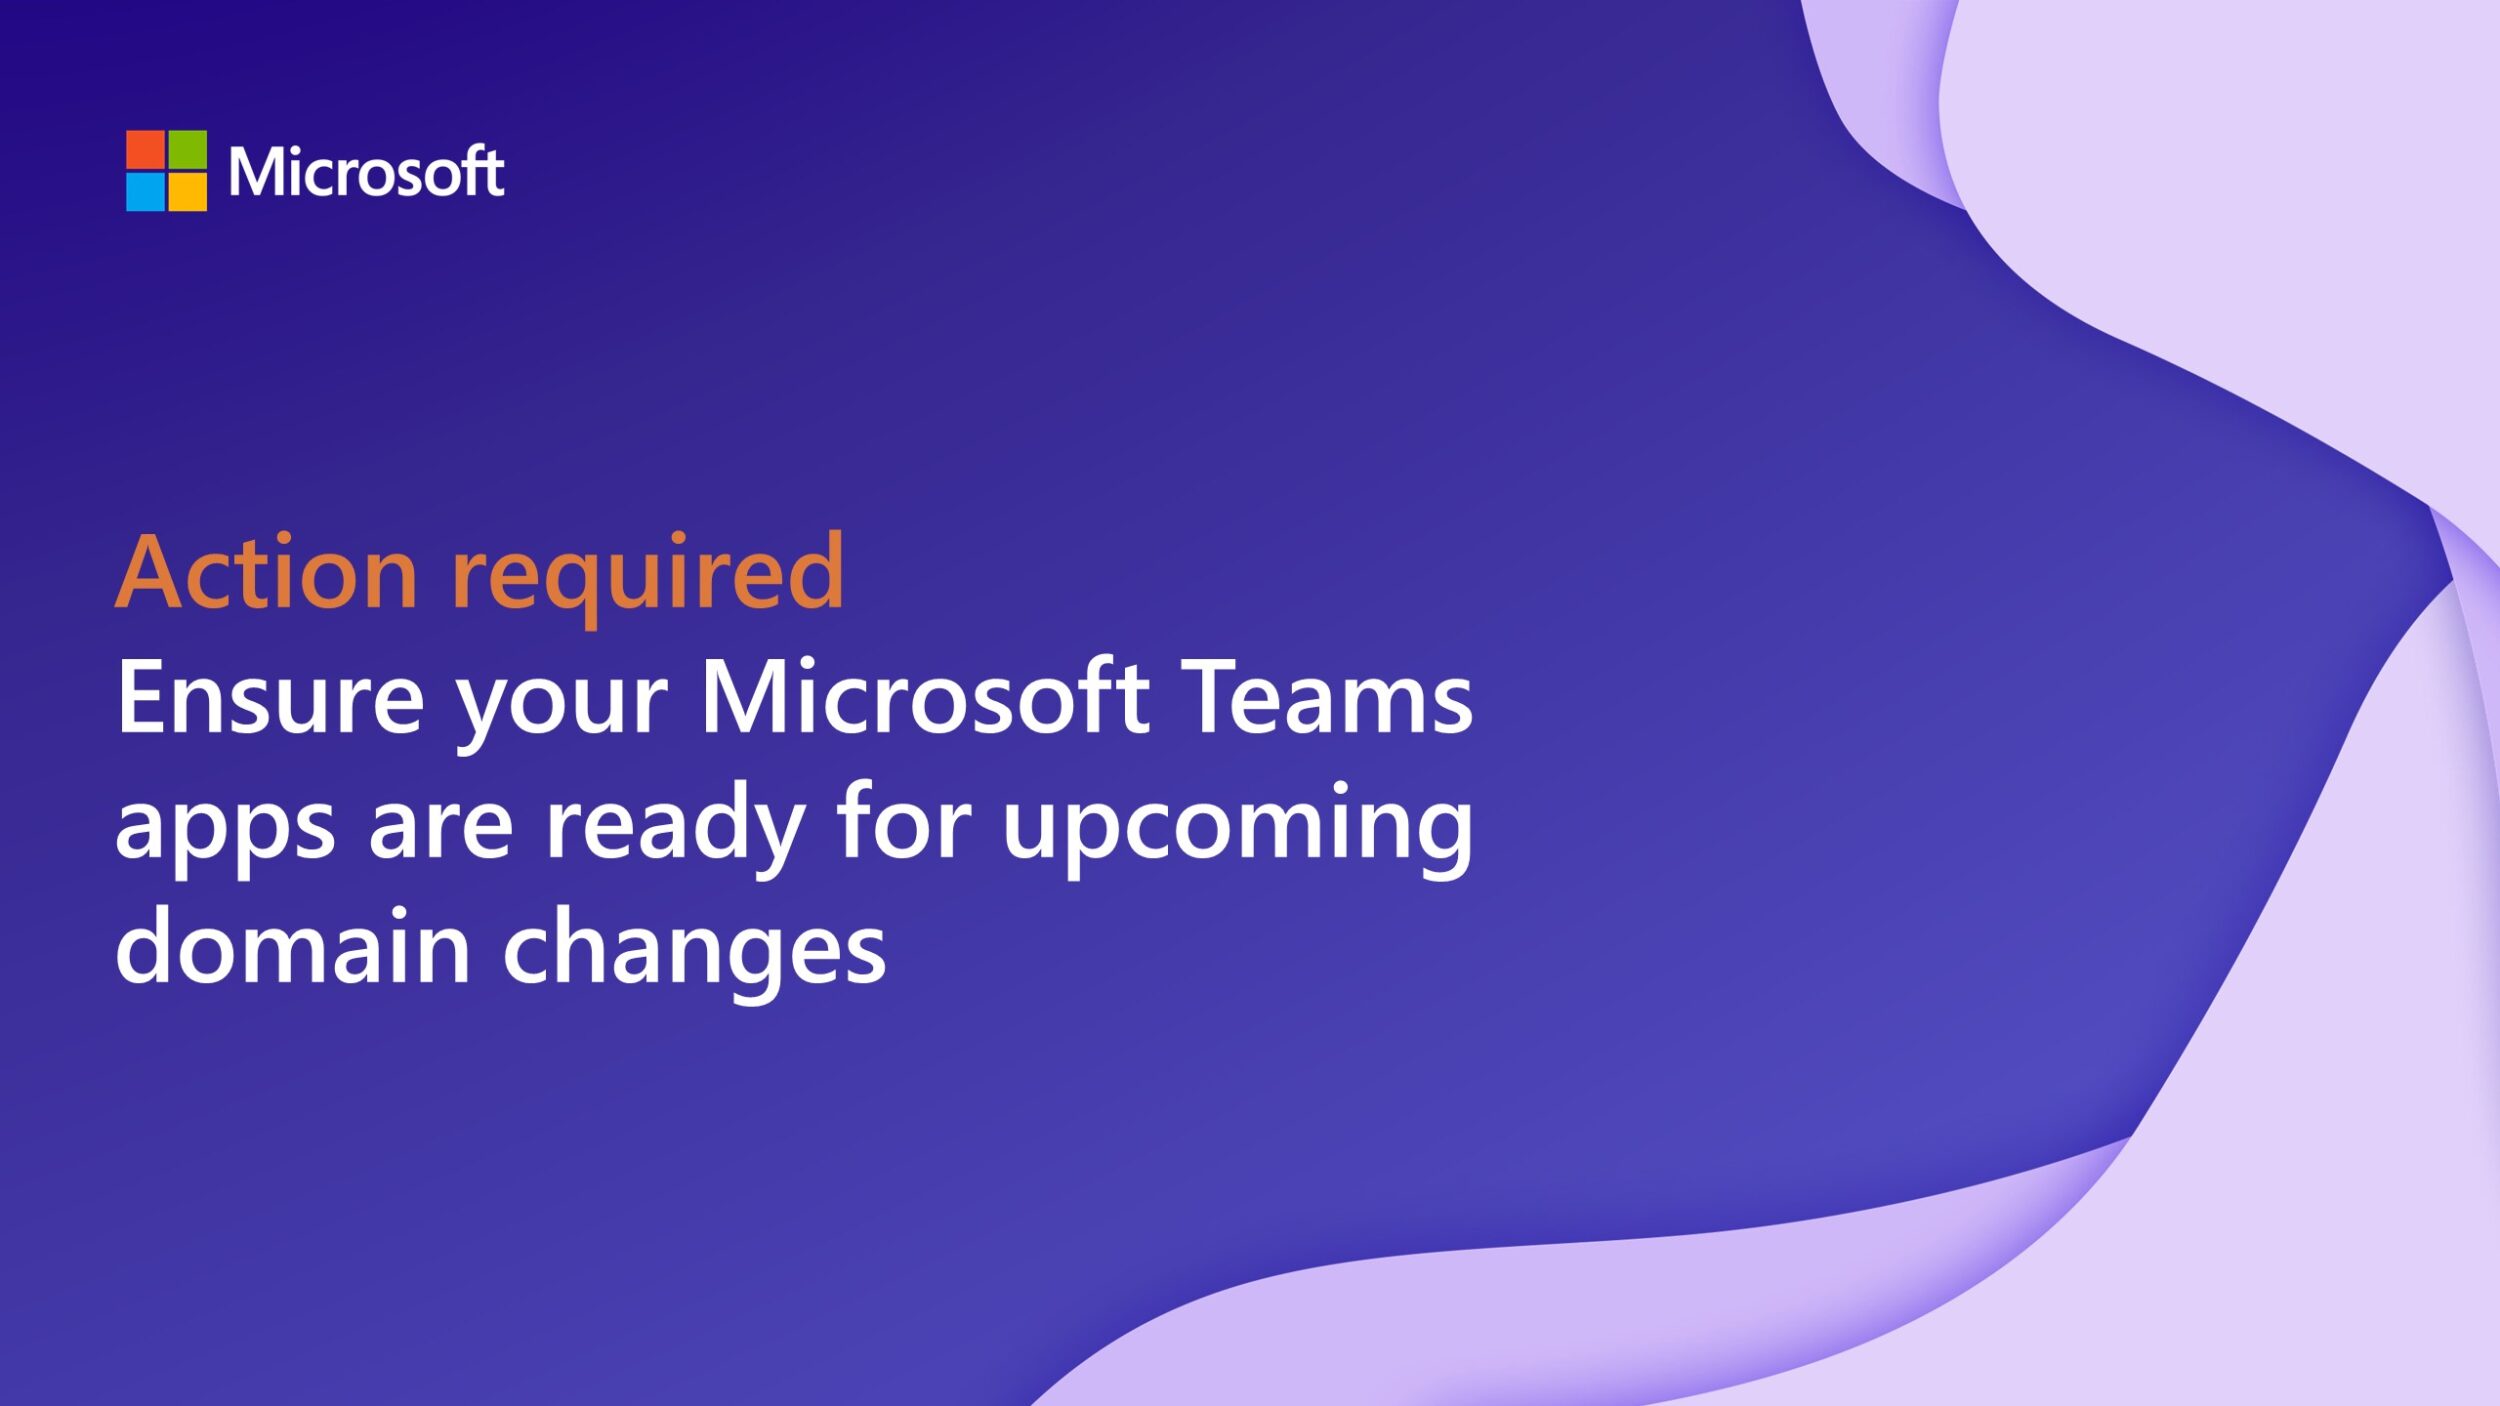 Action required: ensure your Microsoft Teams apps are ready for upcoming domain changes